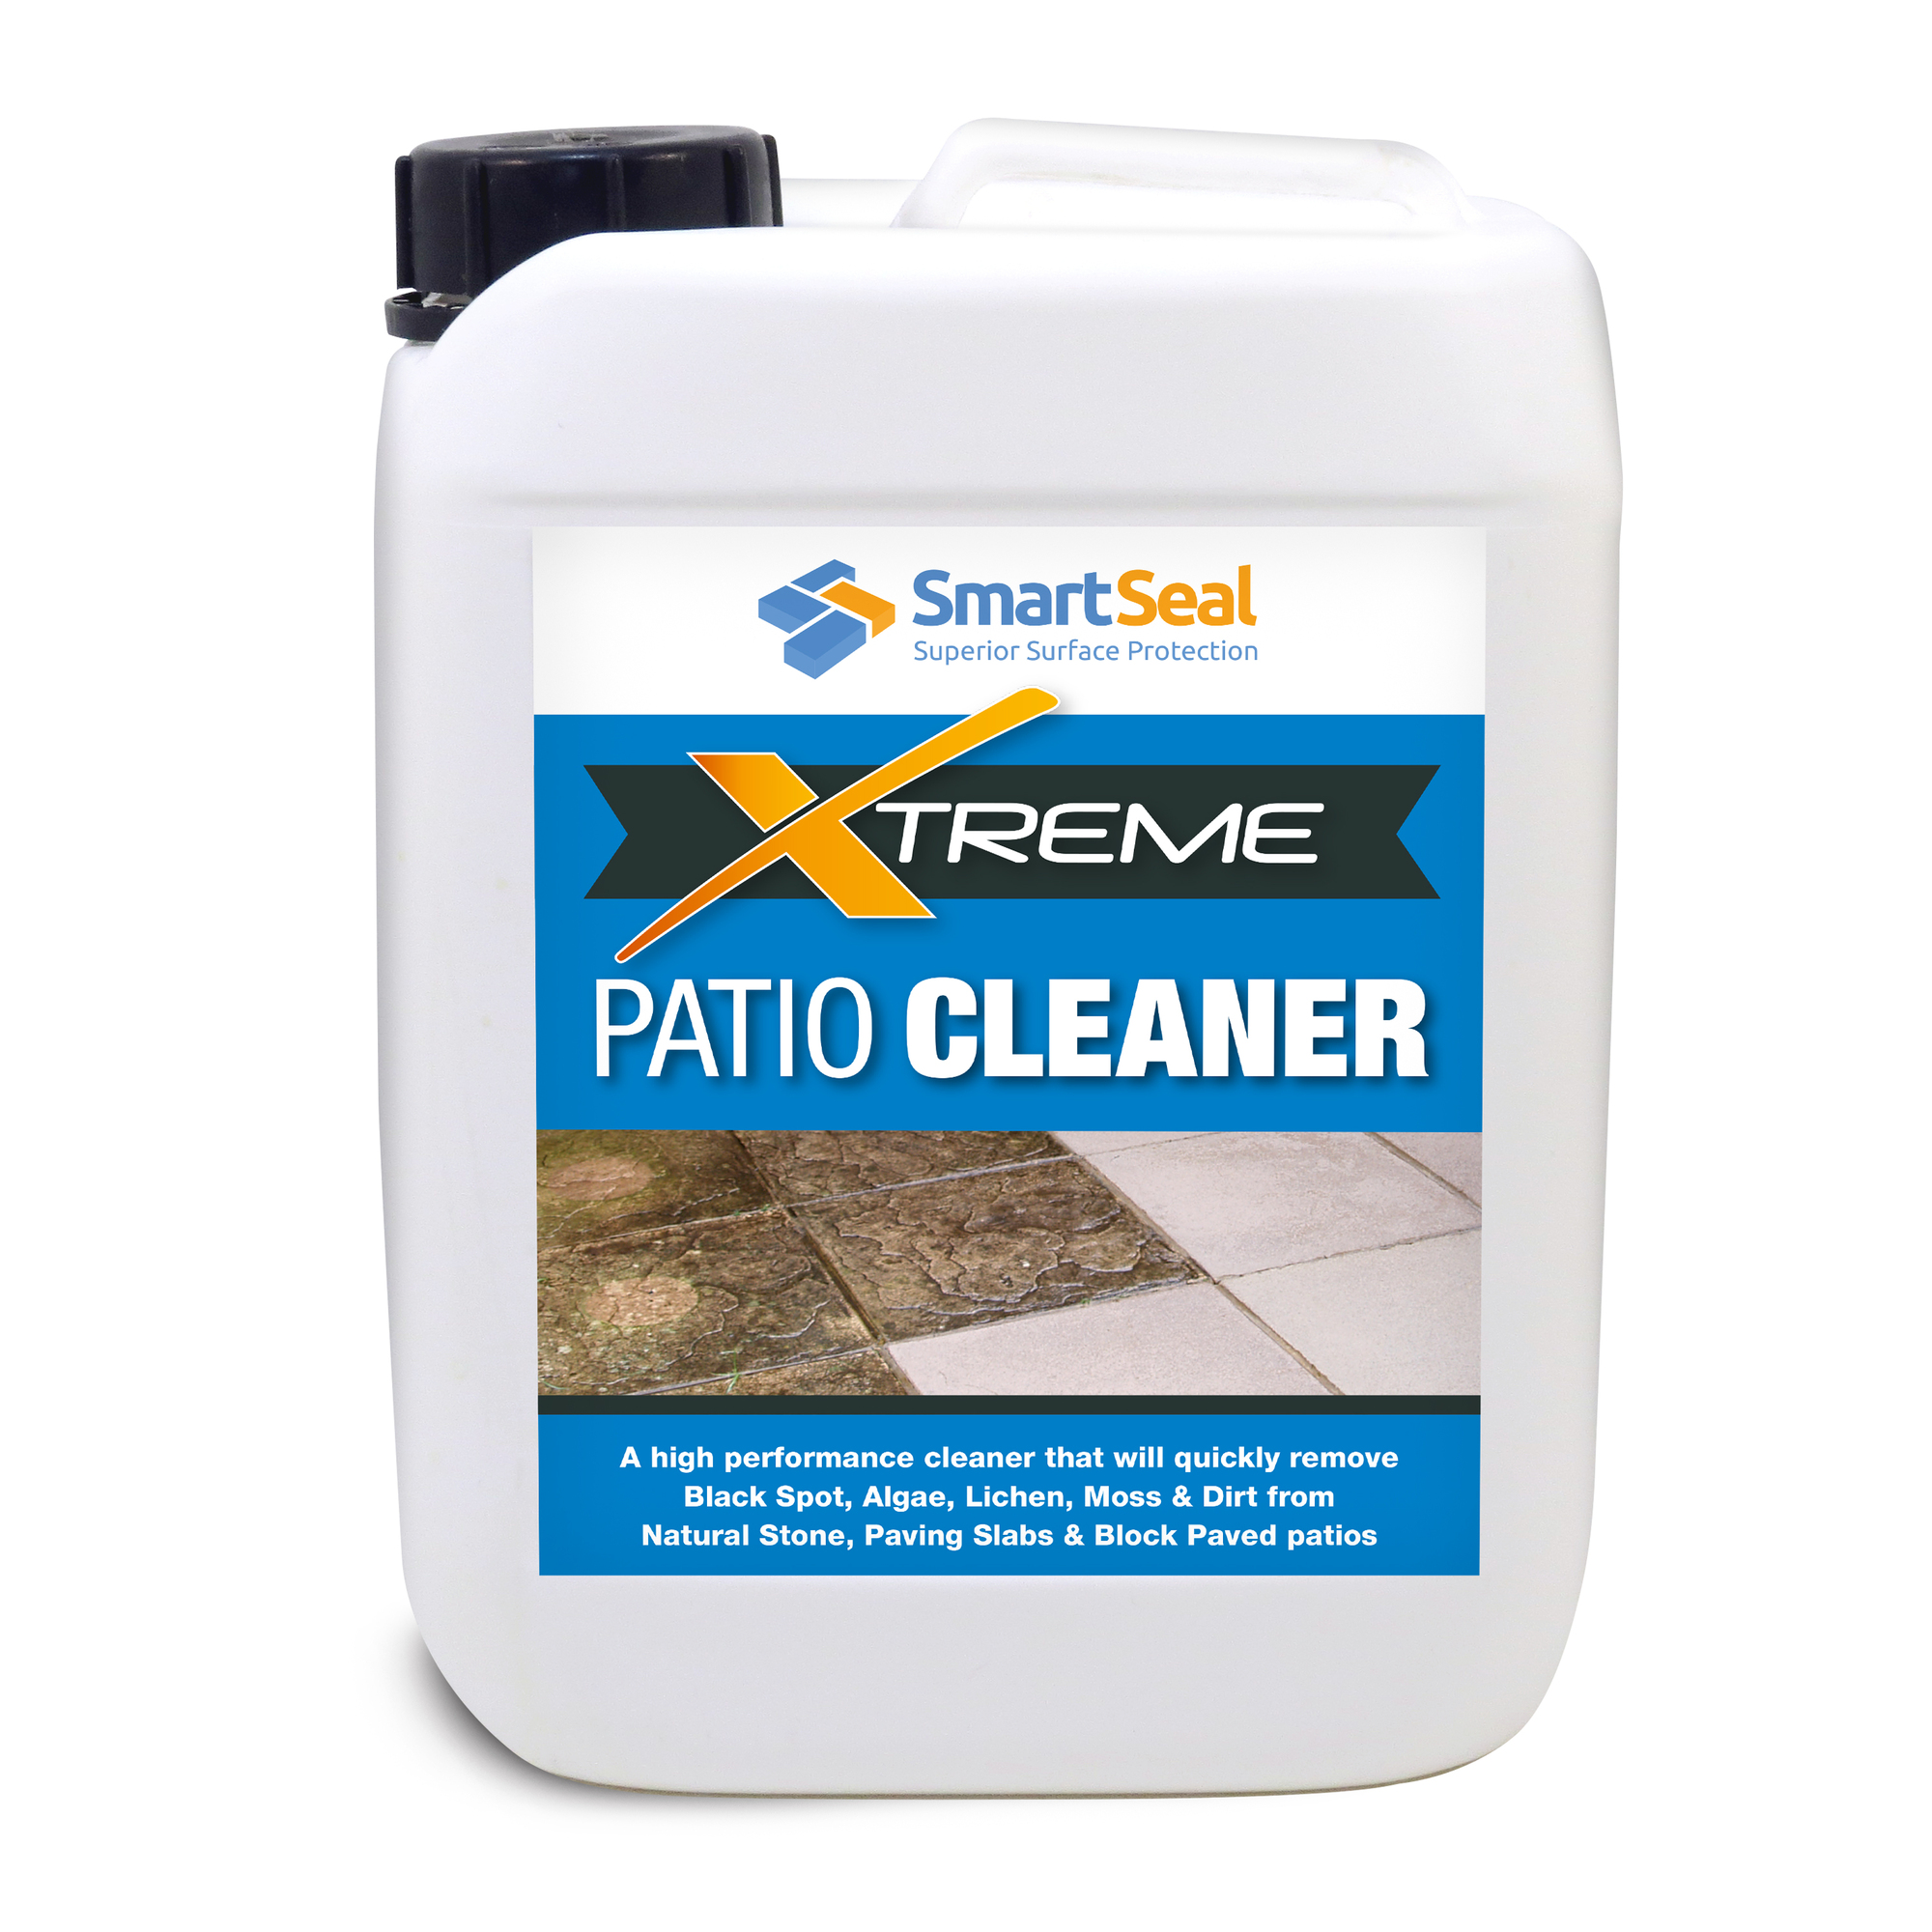 Black Spot Remover Best Patio Cleaner, What Is The Best Patio Cleaner